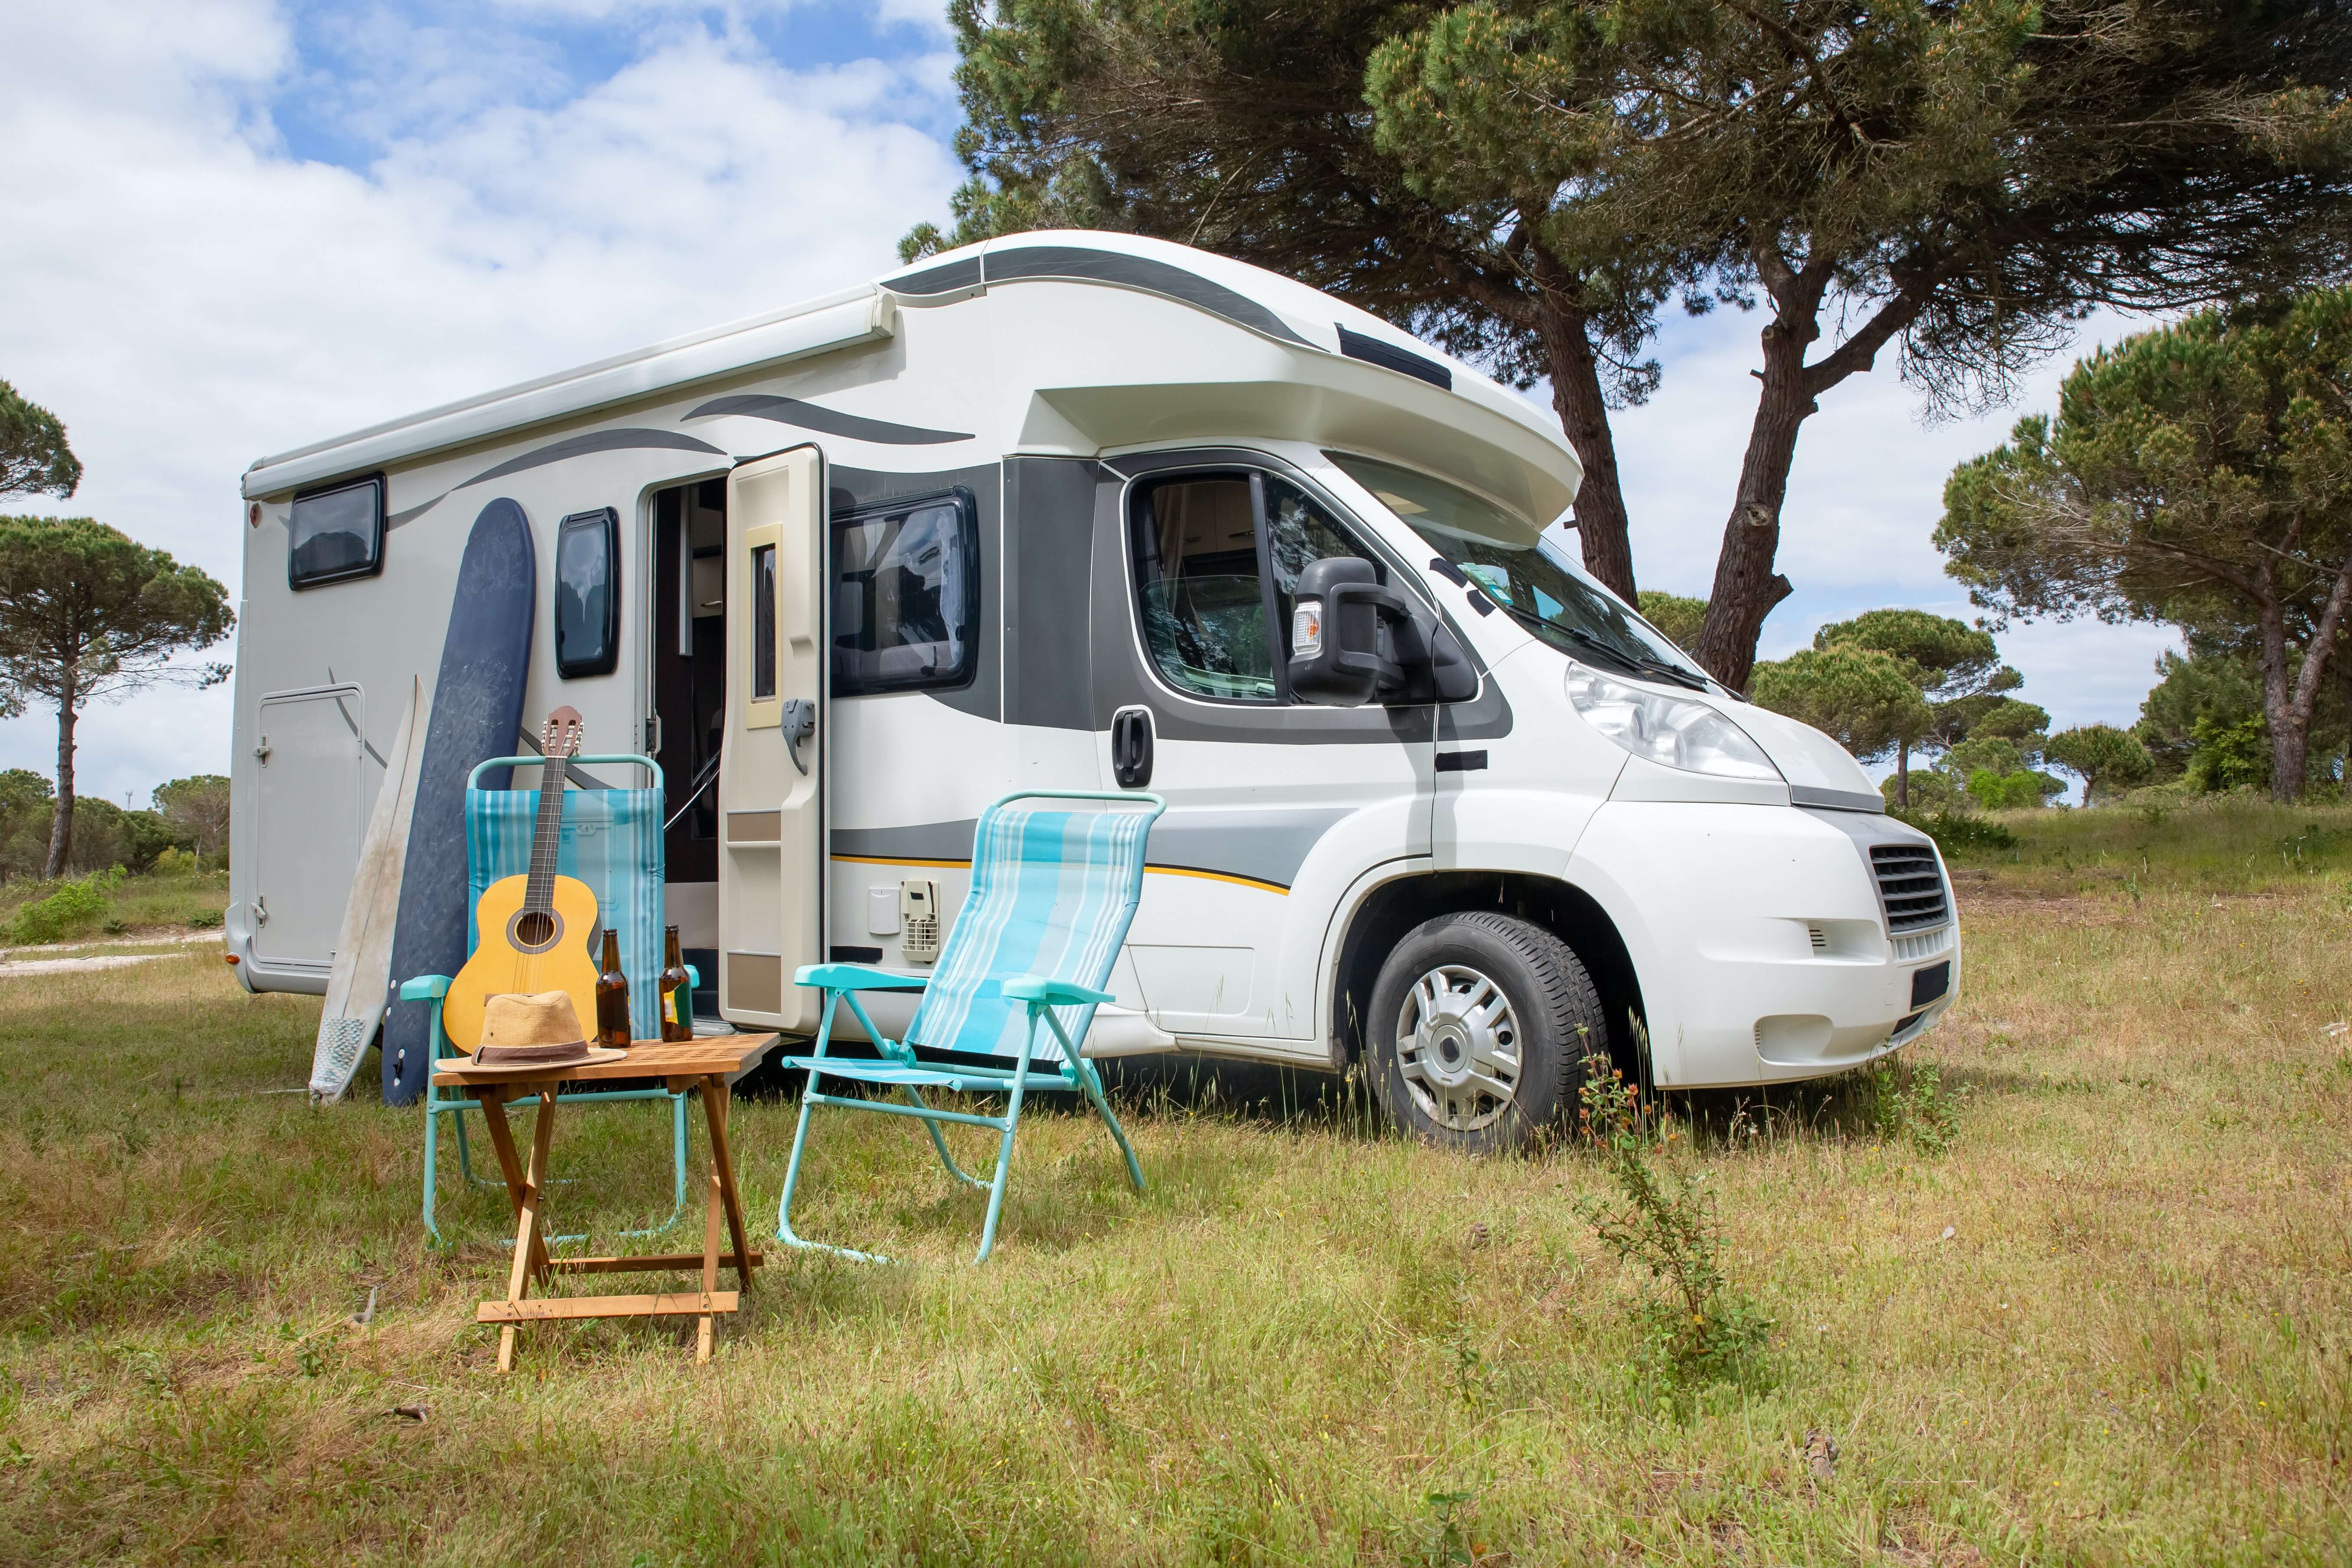 MUST-HAVE TRAVEL TRAILER ACCESSORIES